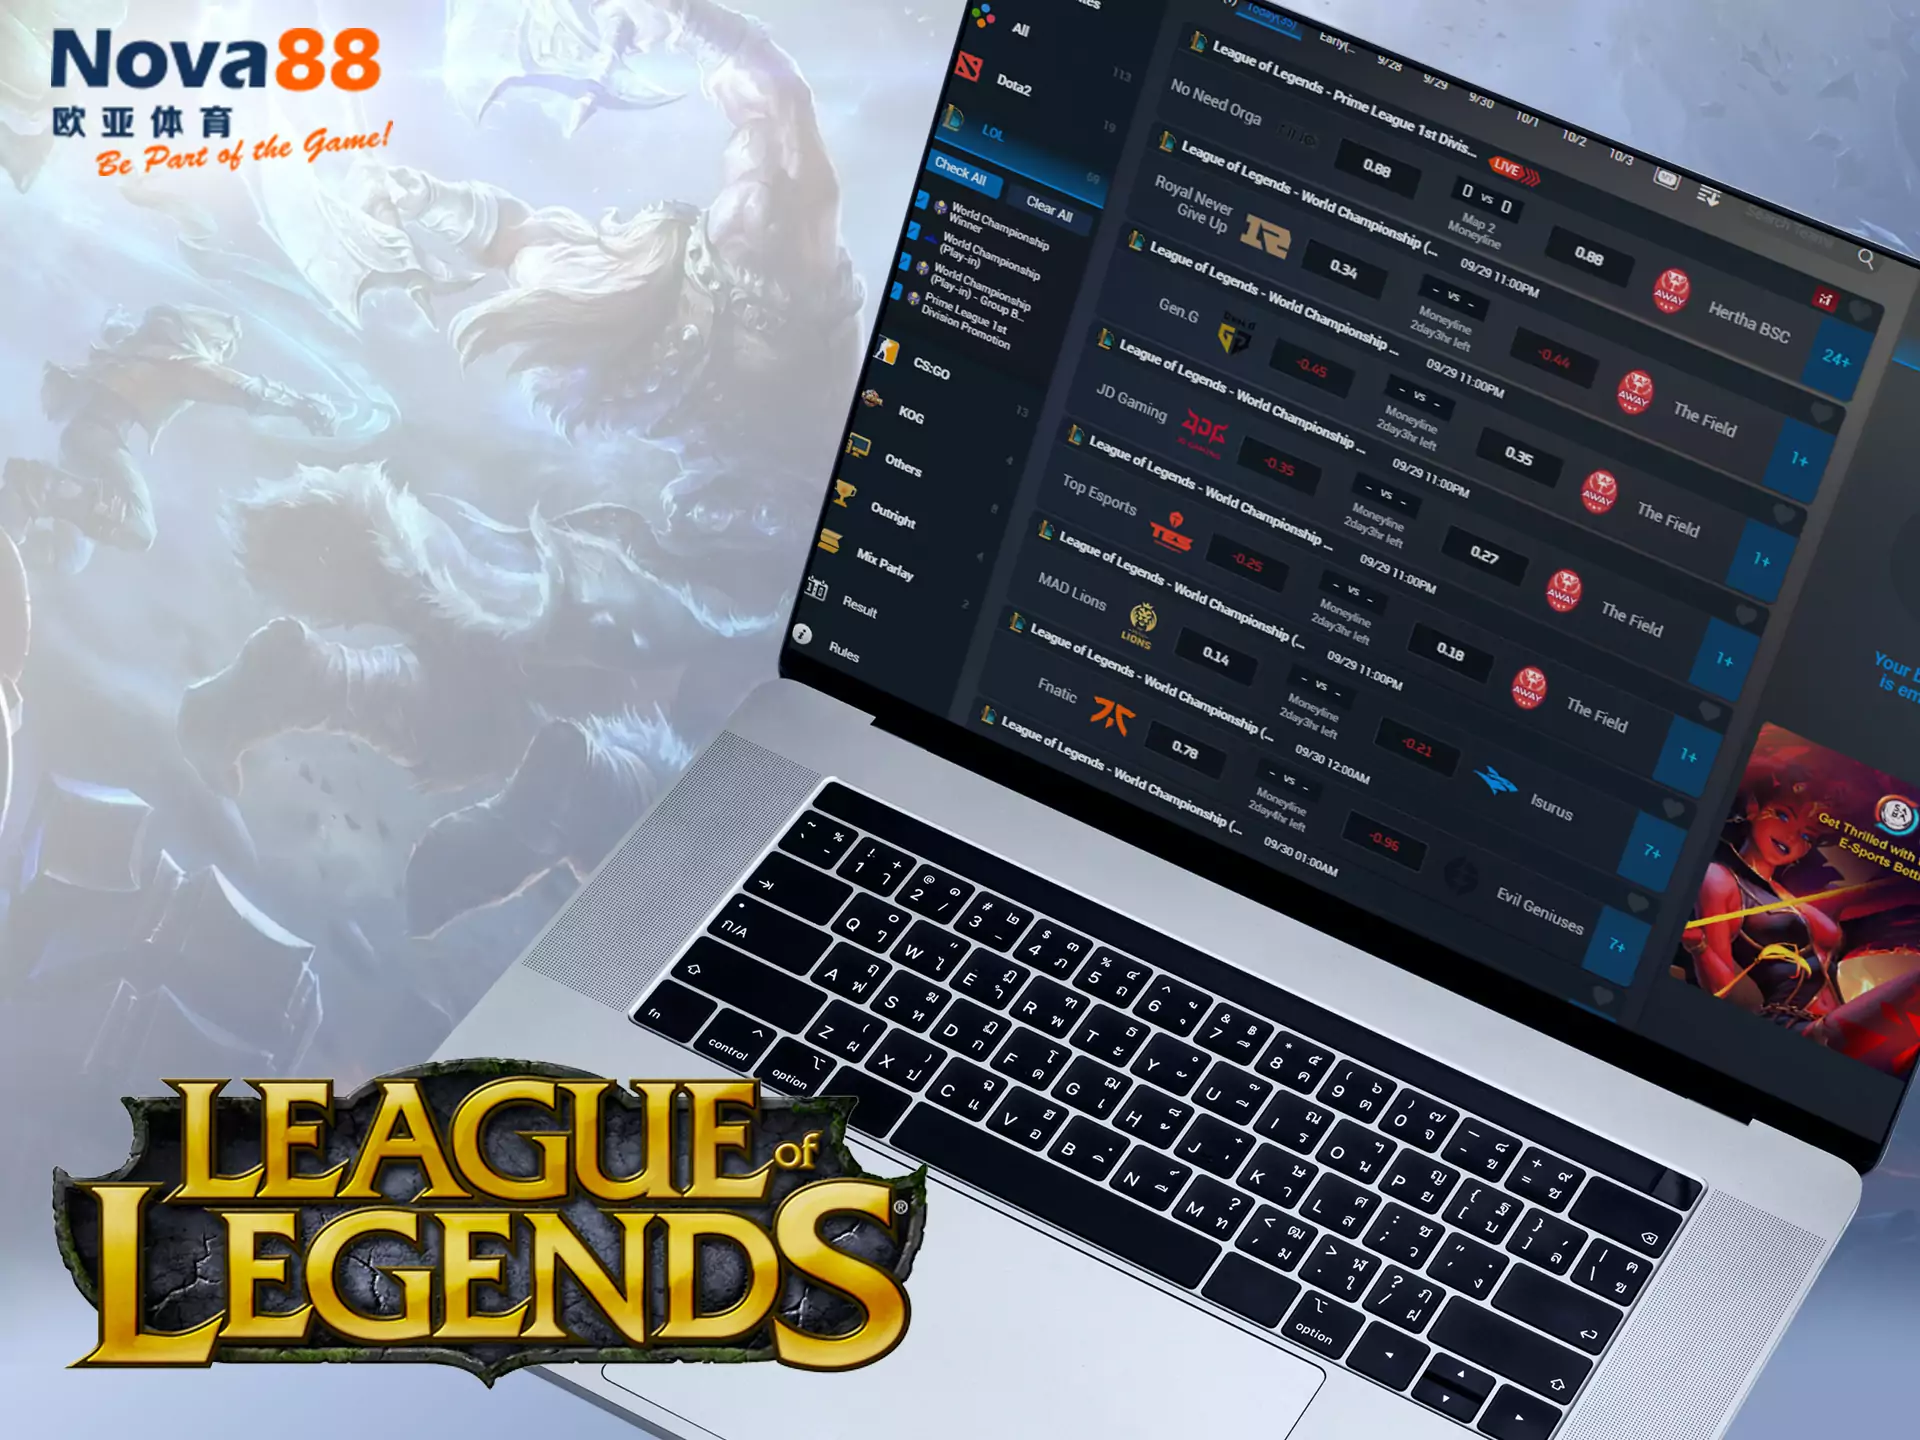 In the Nova88 sportsbook, you find League of Legends tournaments available for placing bets.